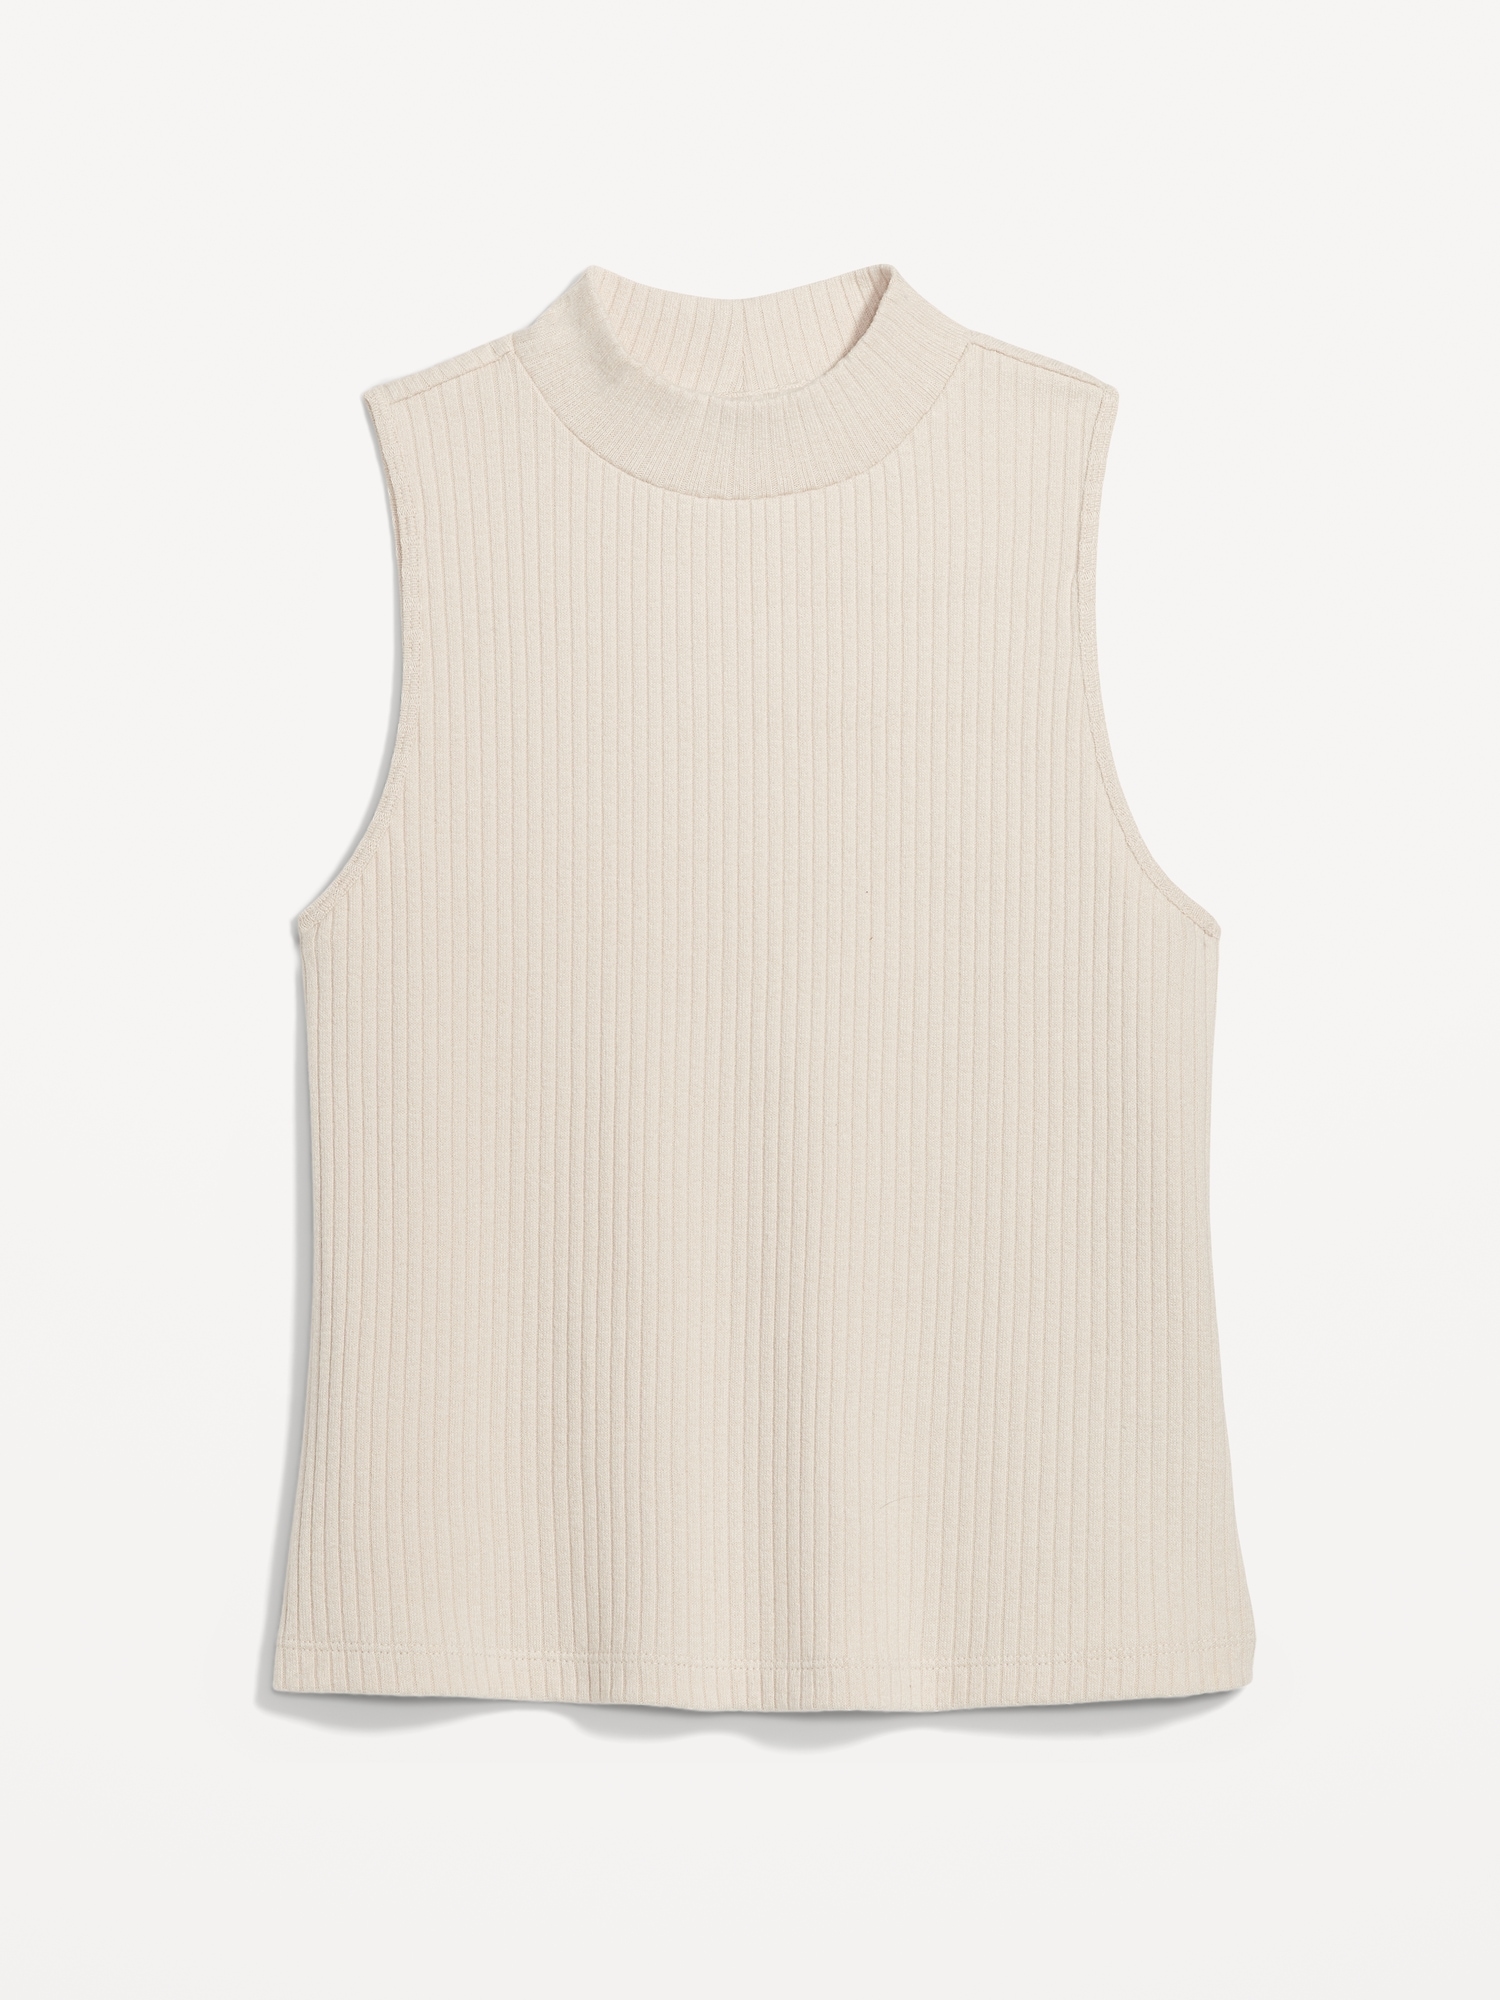 Fitted Sleeveless Mock-Neck Top for Women | Old Navy